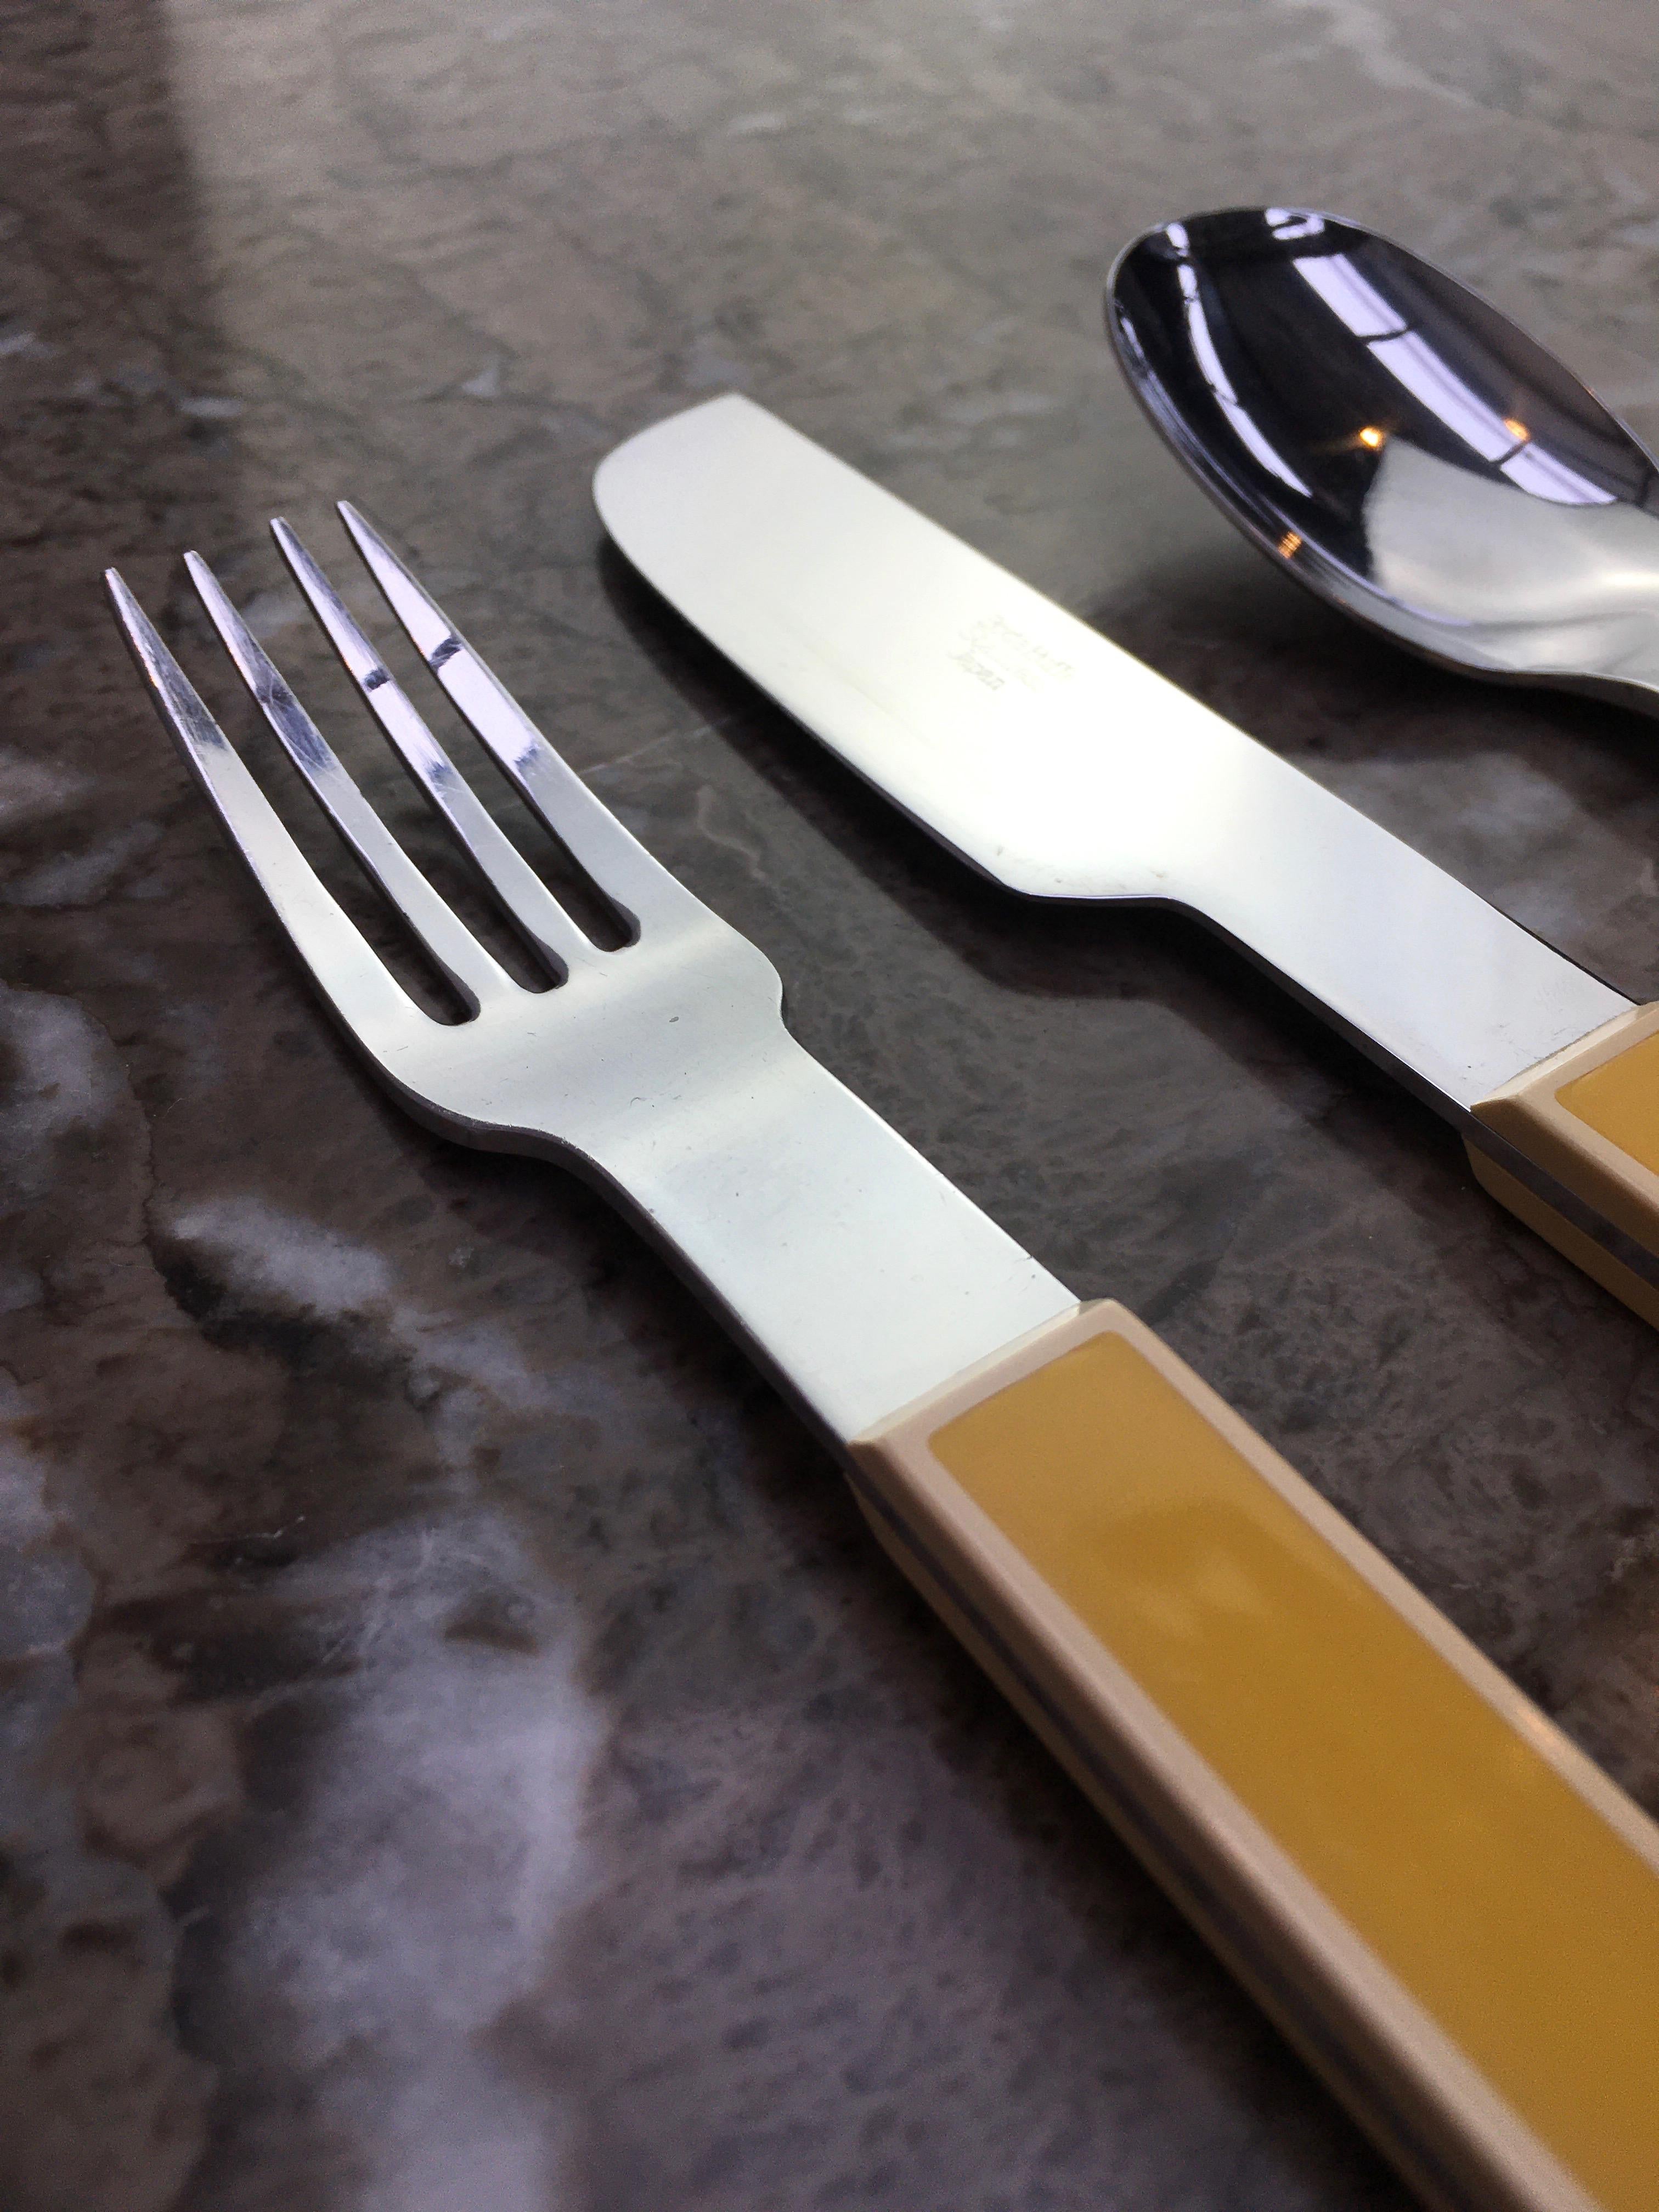 Mid-Century Modern Signe Persson-Melin Cutlery Set For Six, Boda Buffe Sweden, Made In Japan